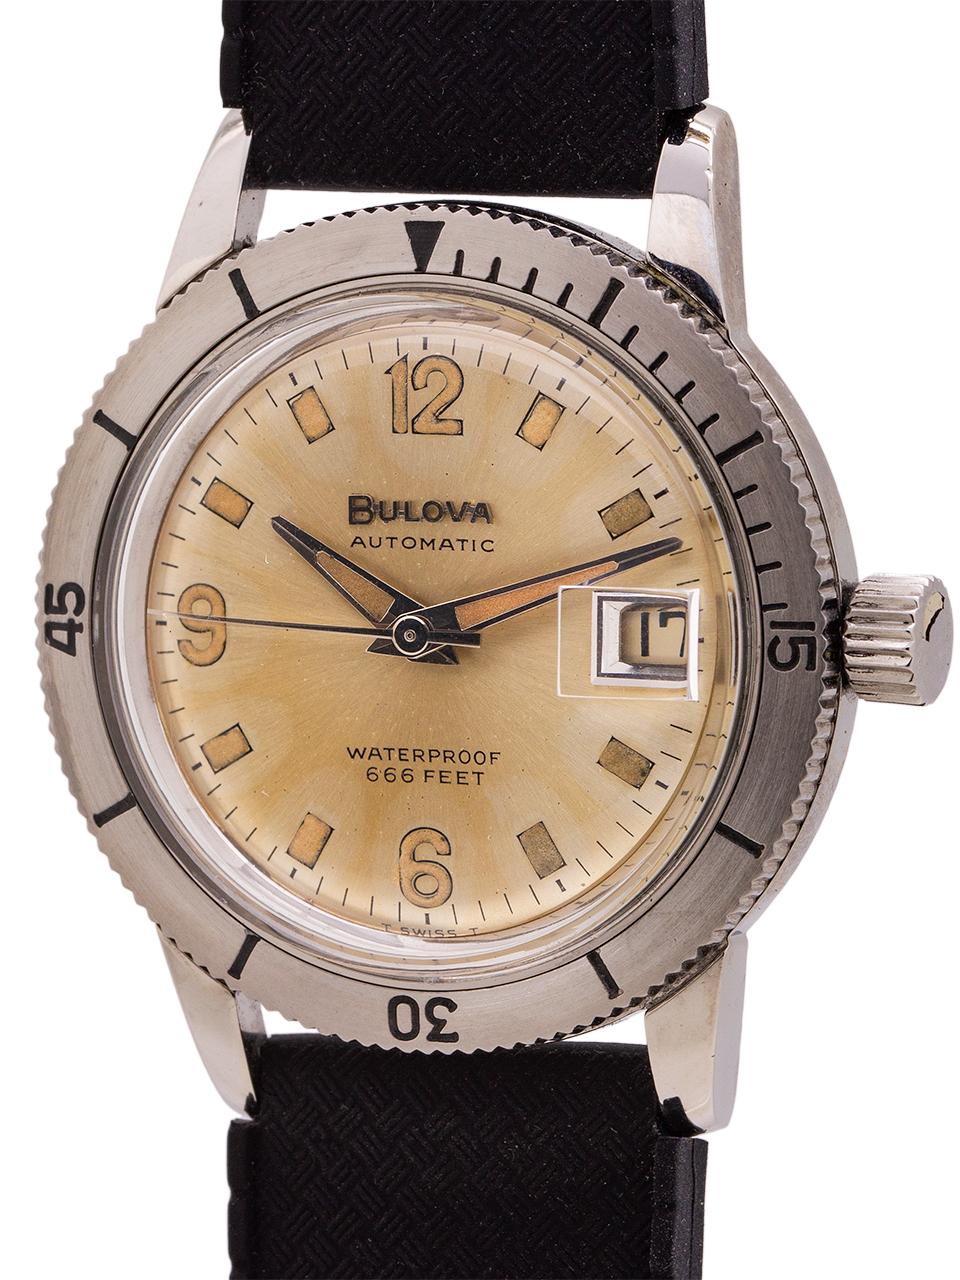 Bulova Divers Automatic 666 Feet, circa 1960s In Excellent Condition For Sale In West Hollywood, CA